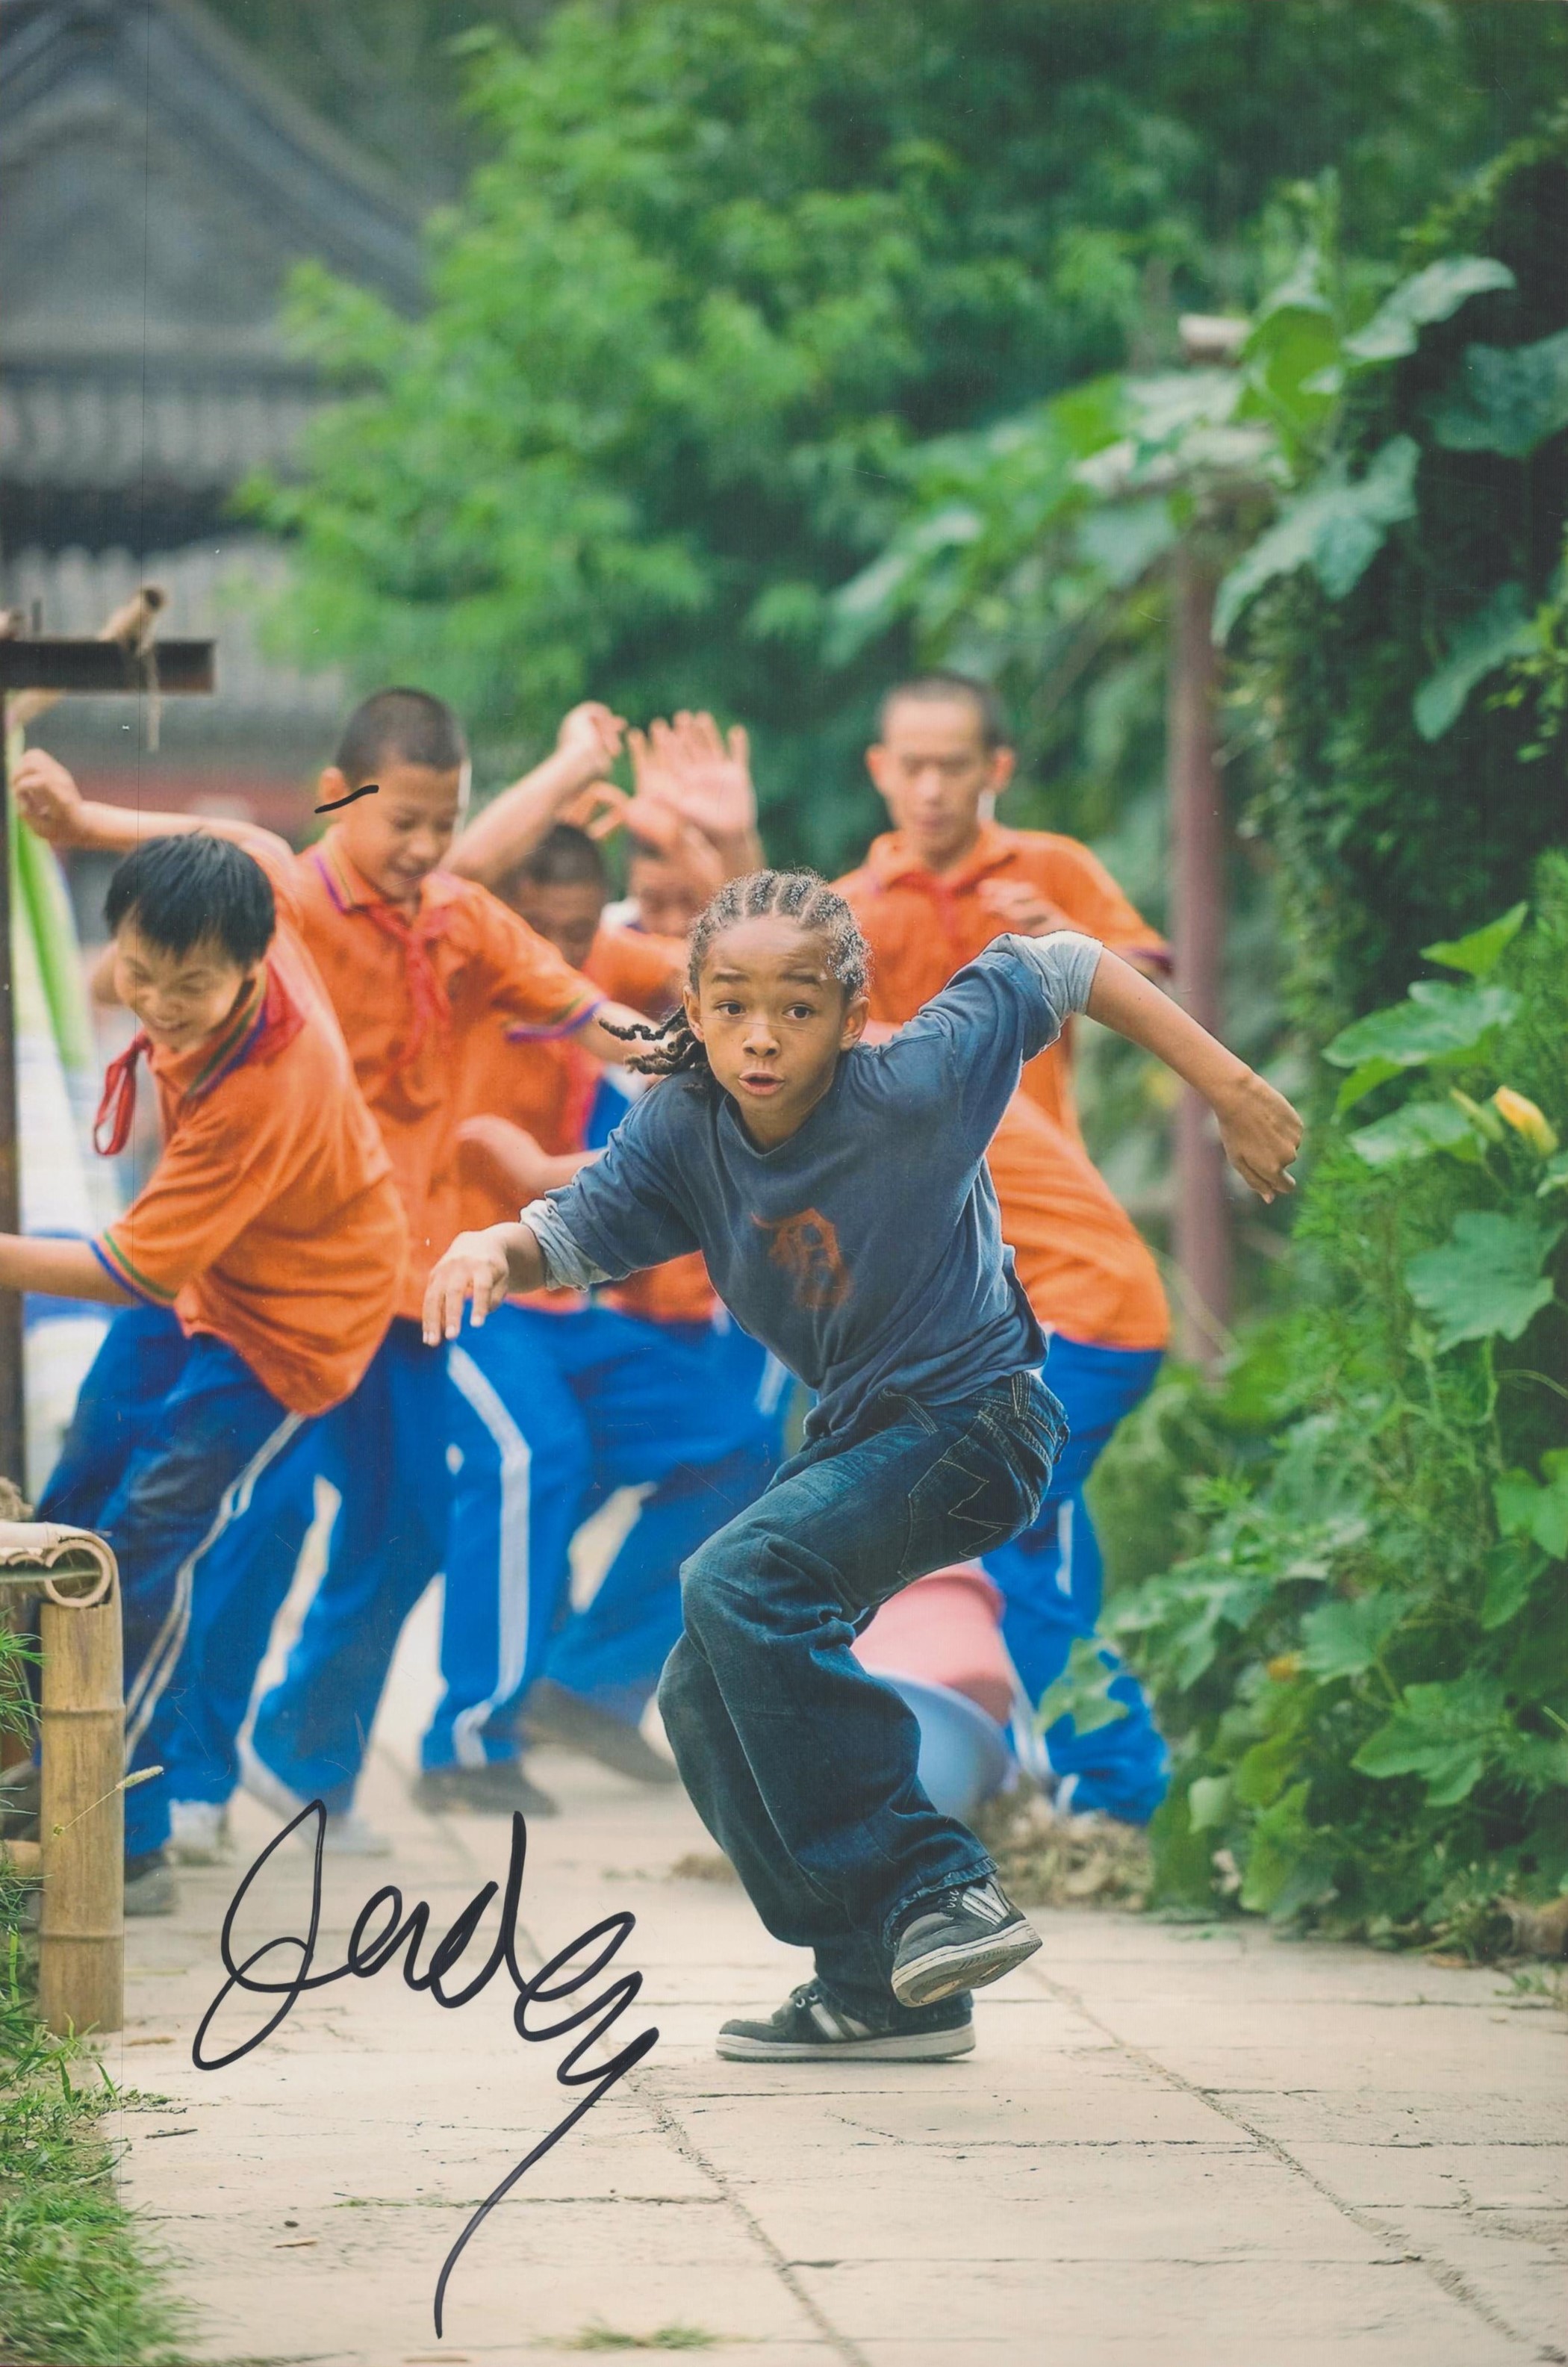 Jaden Smith signed Karate Kid 12x8 colour photo. Good condition. All autographs come with a